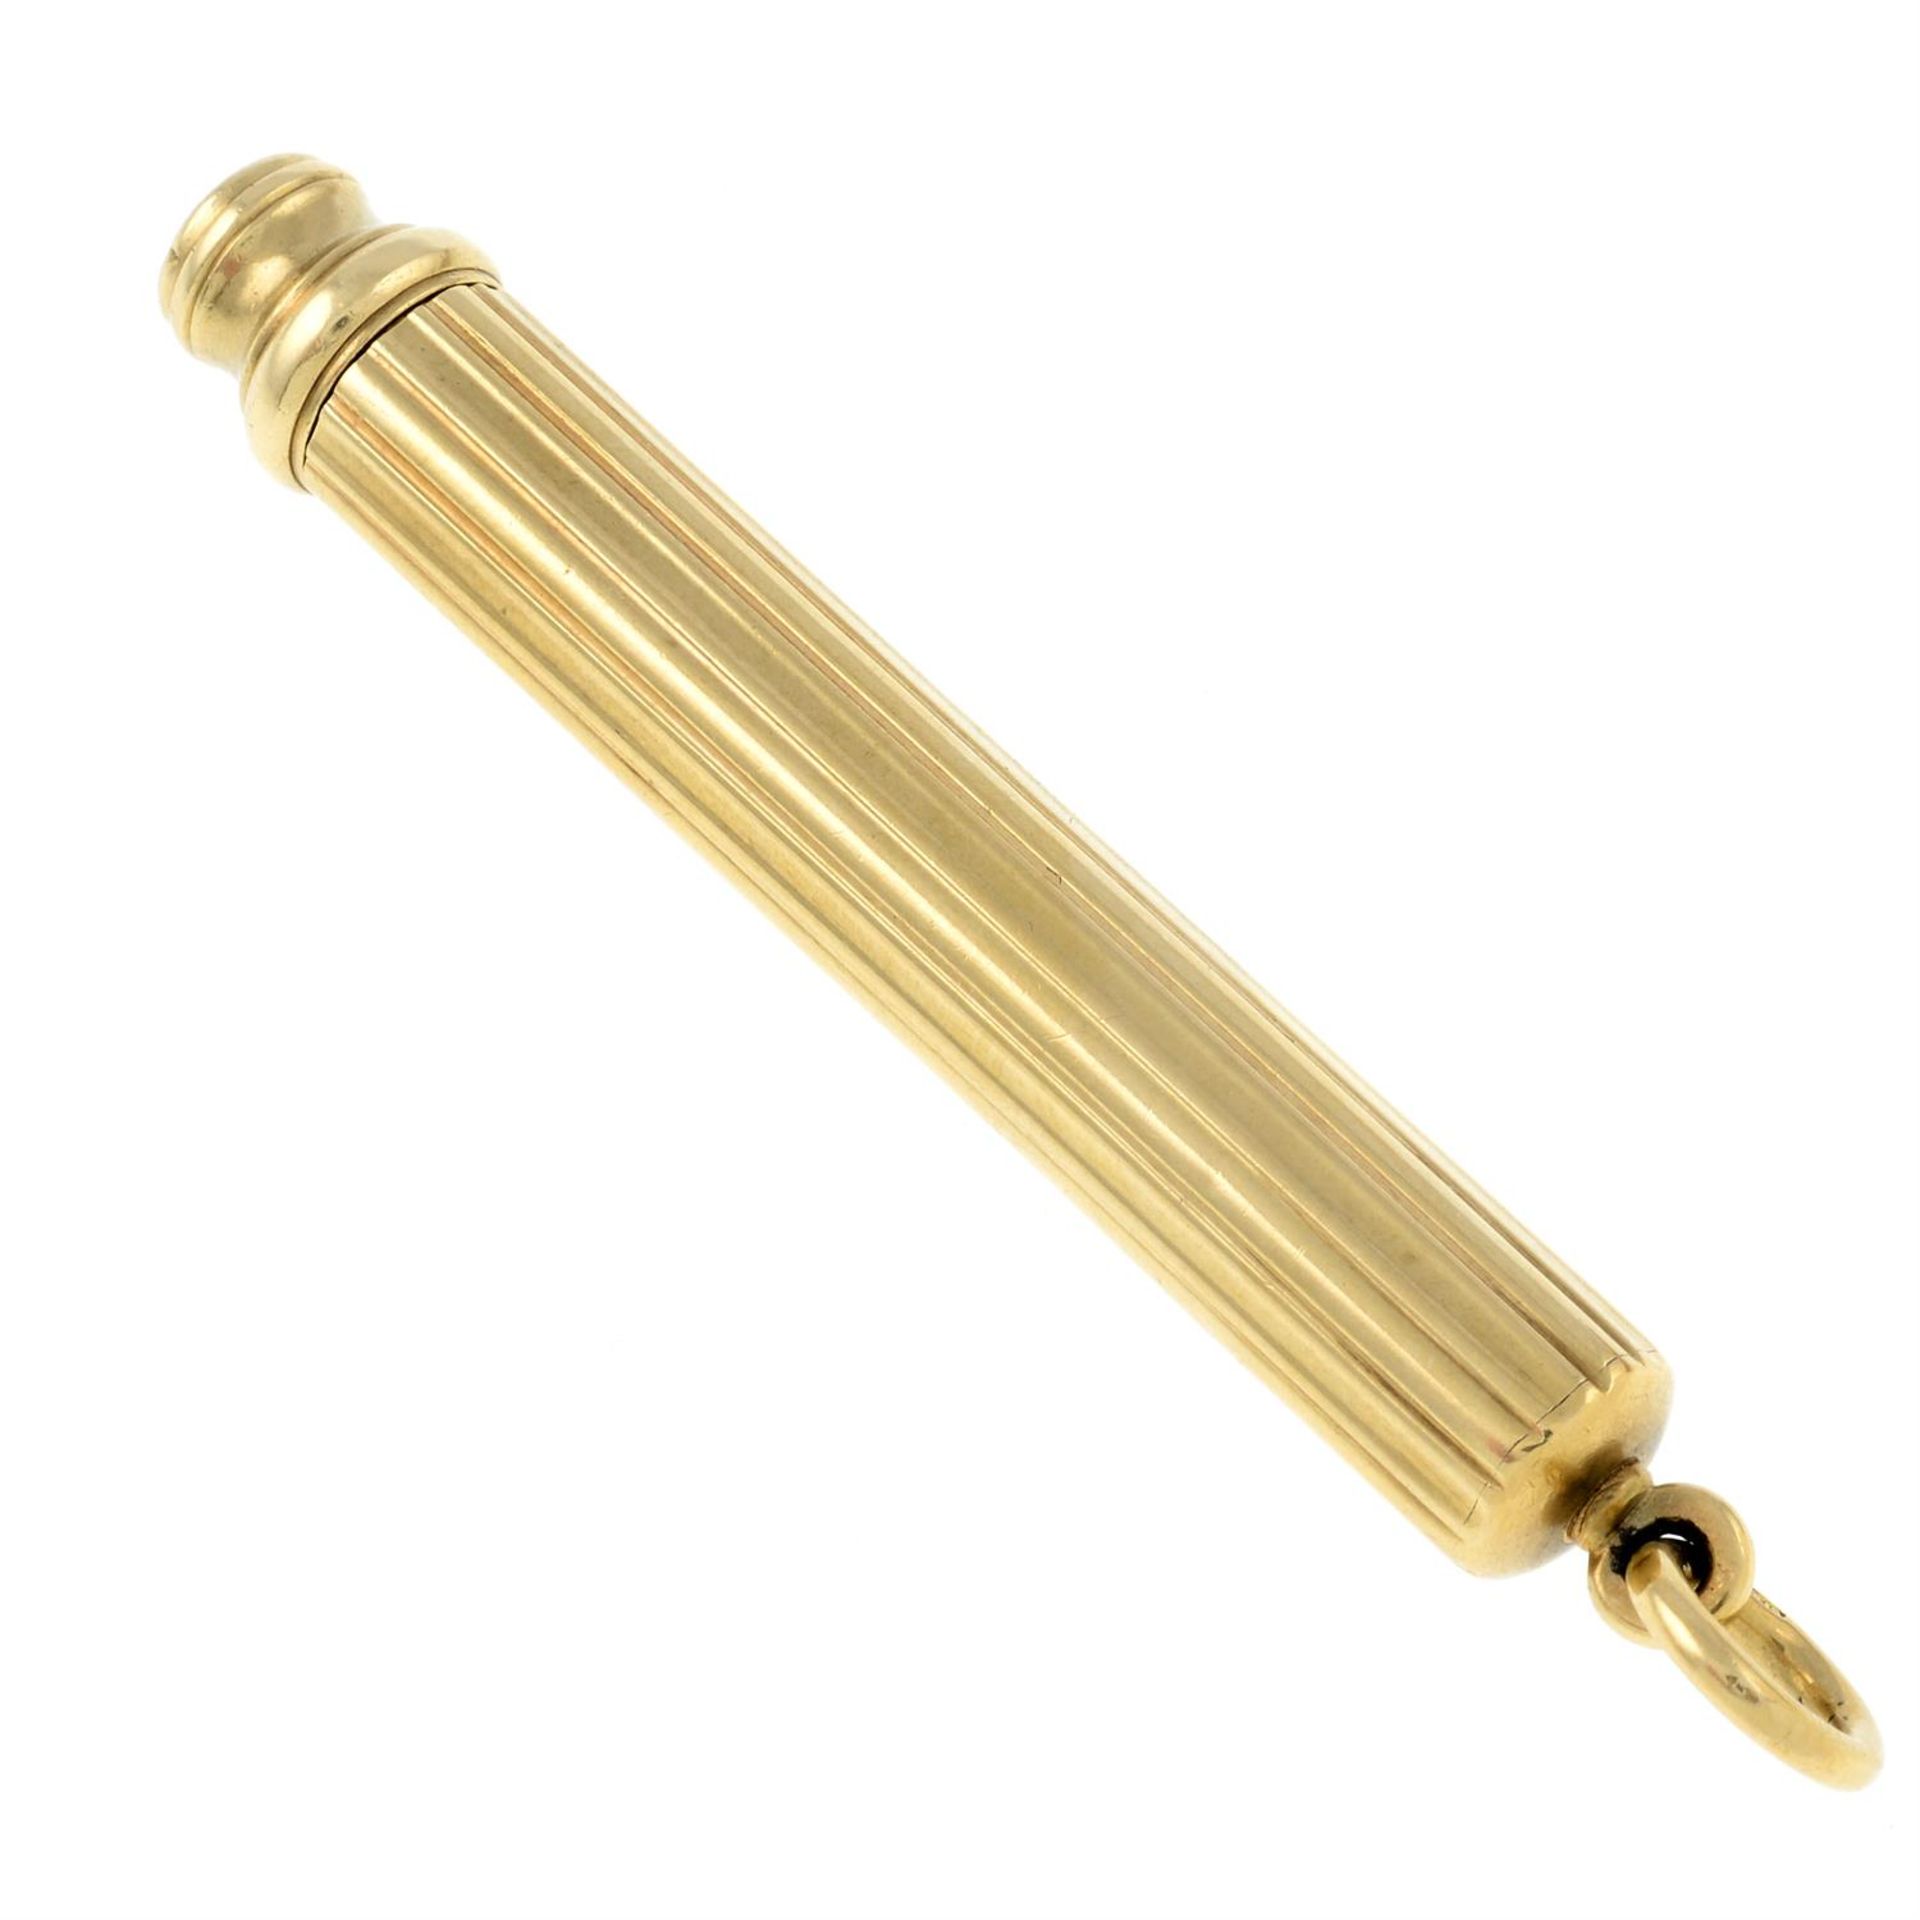 An early 20th century 9ct gold propelling pencil, by Sampson, Mordan & Co. - Image 2 of 2